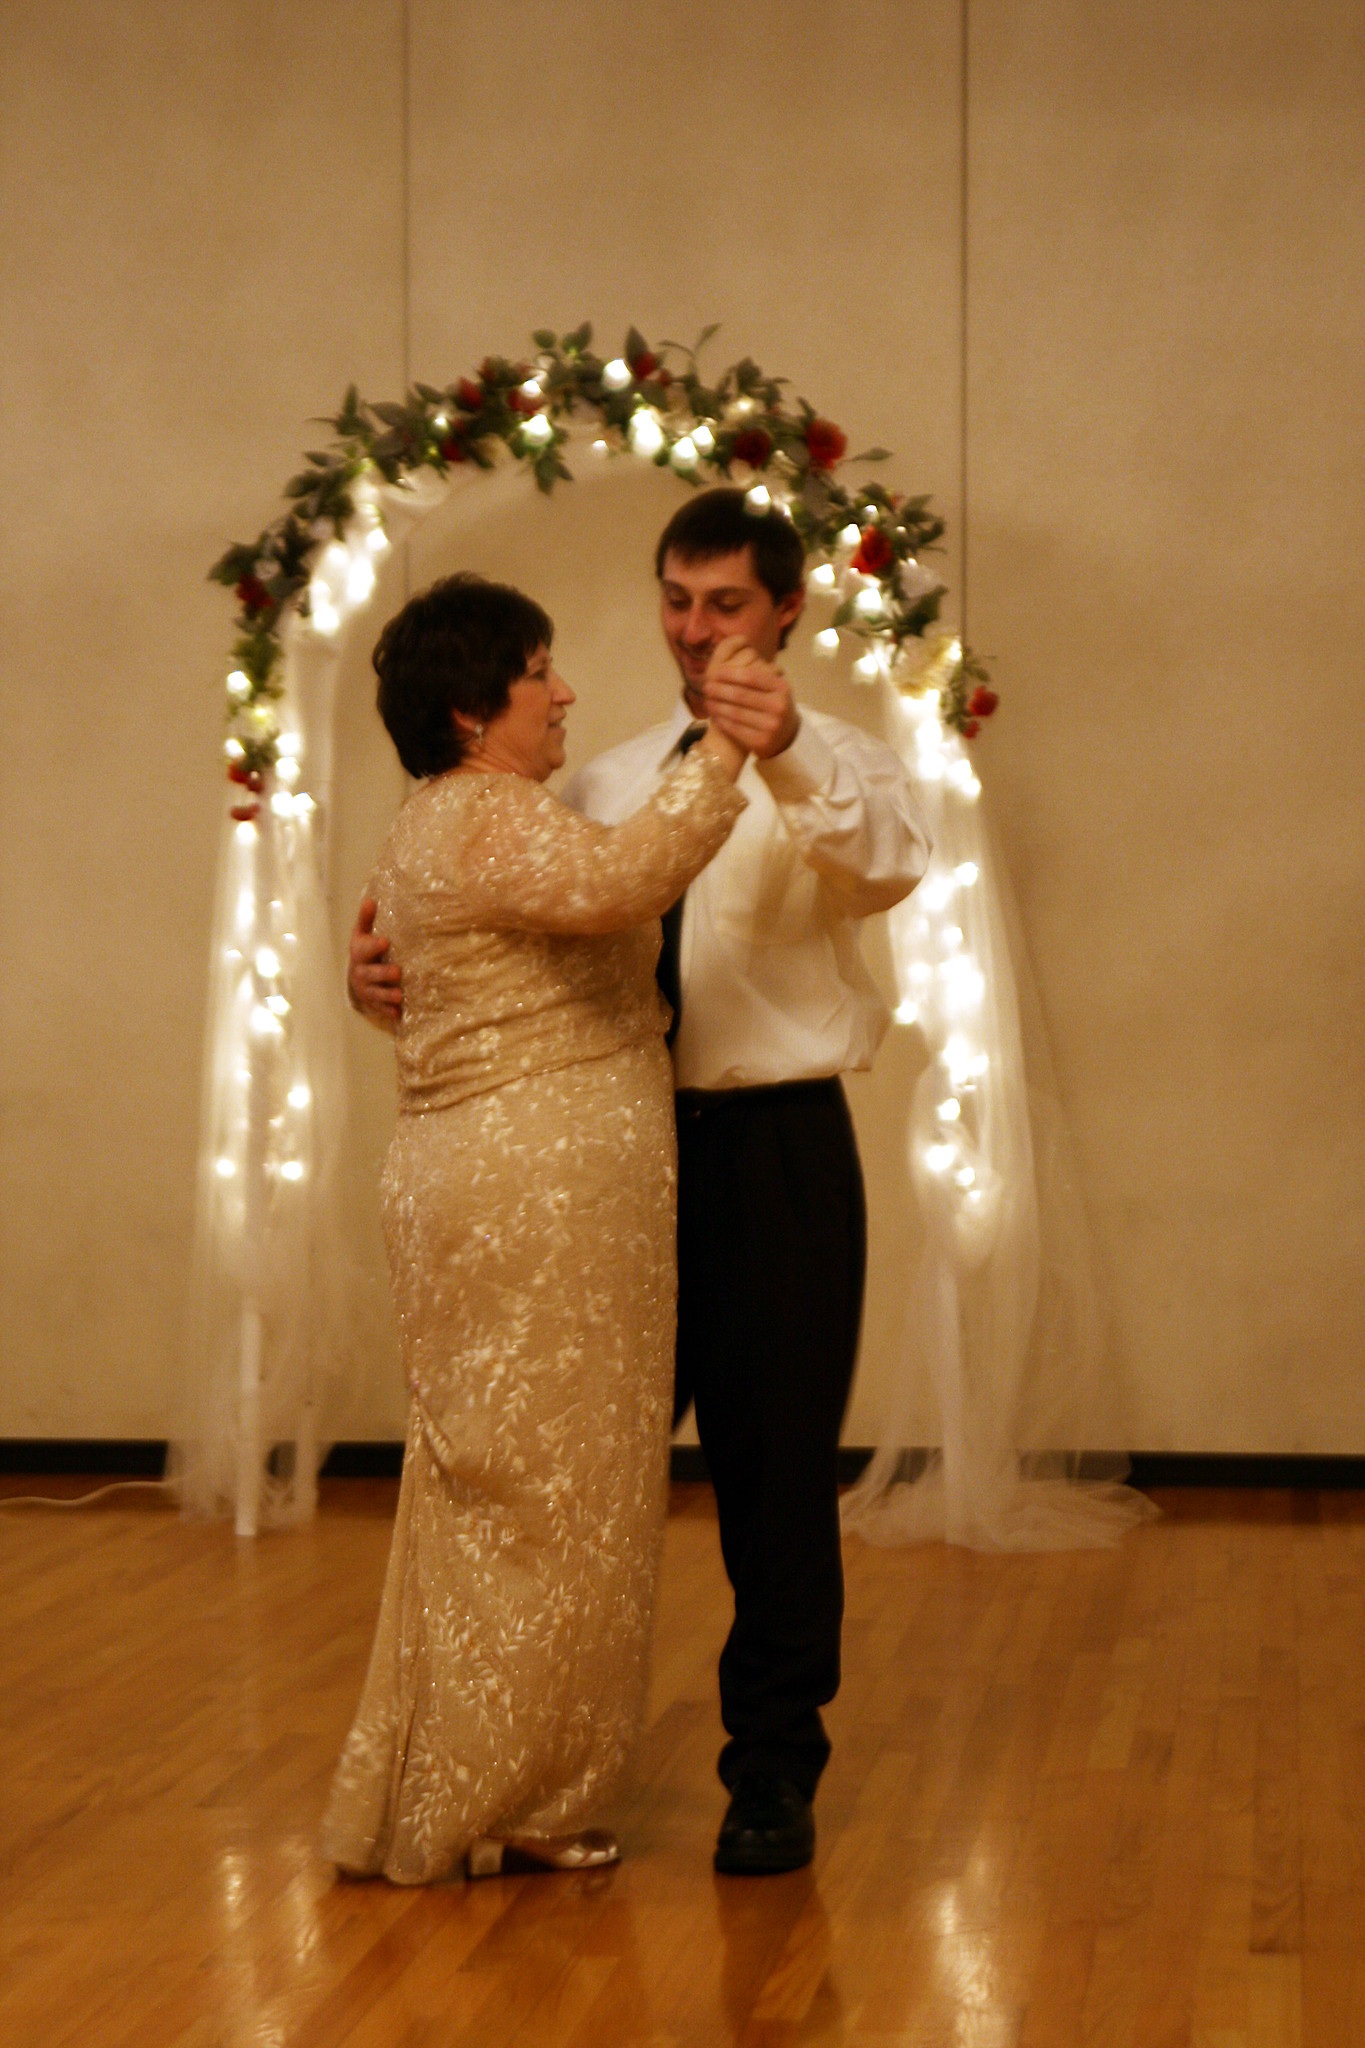 A son sharing a dance with his mother at his wedding | Source: Flickr